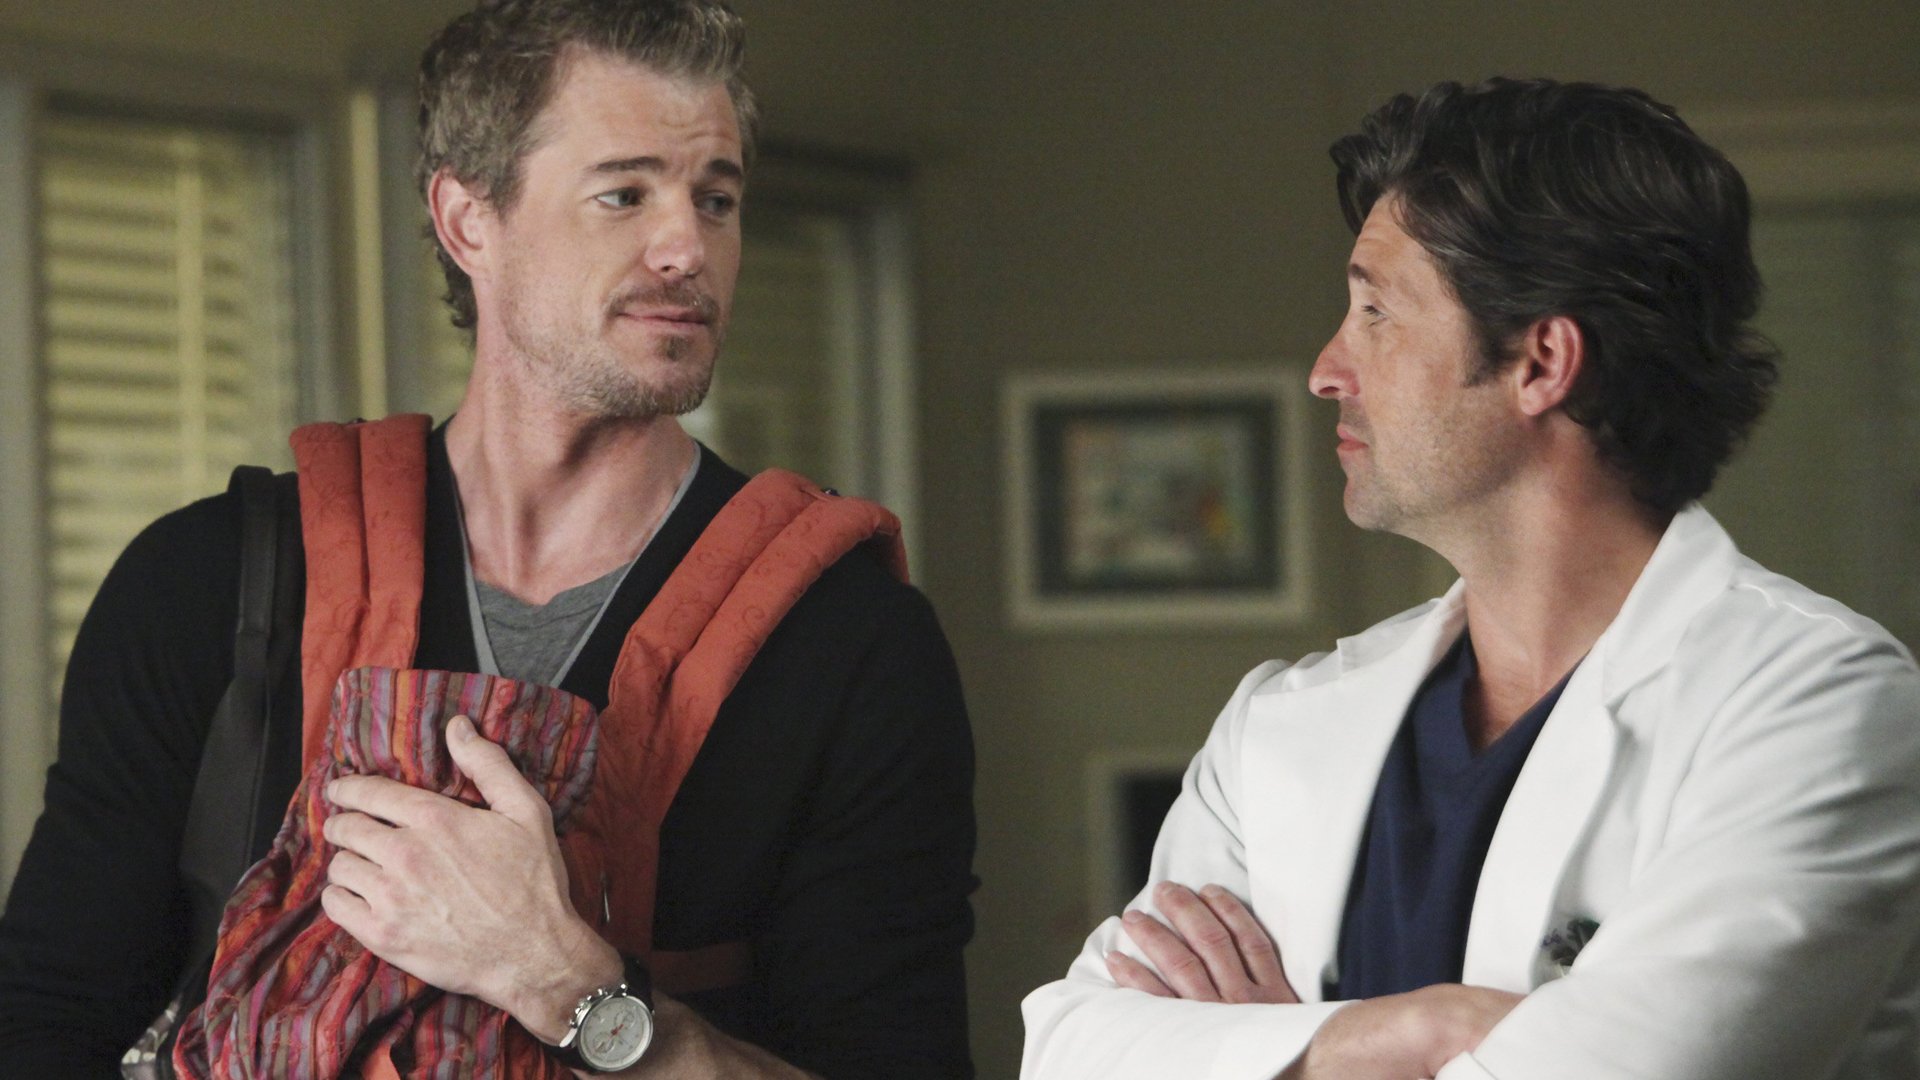 Your best friend mark sloan helped you leave him and you two had some adult...